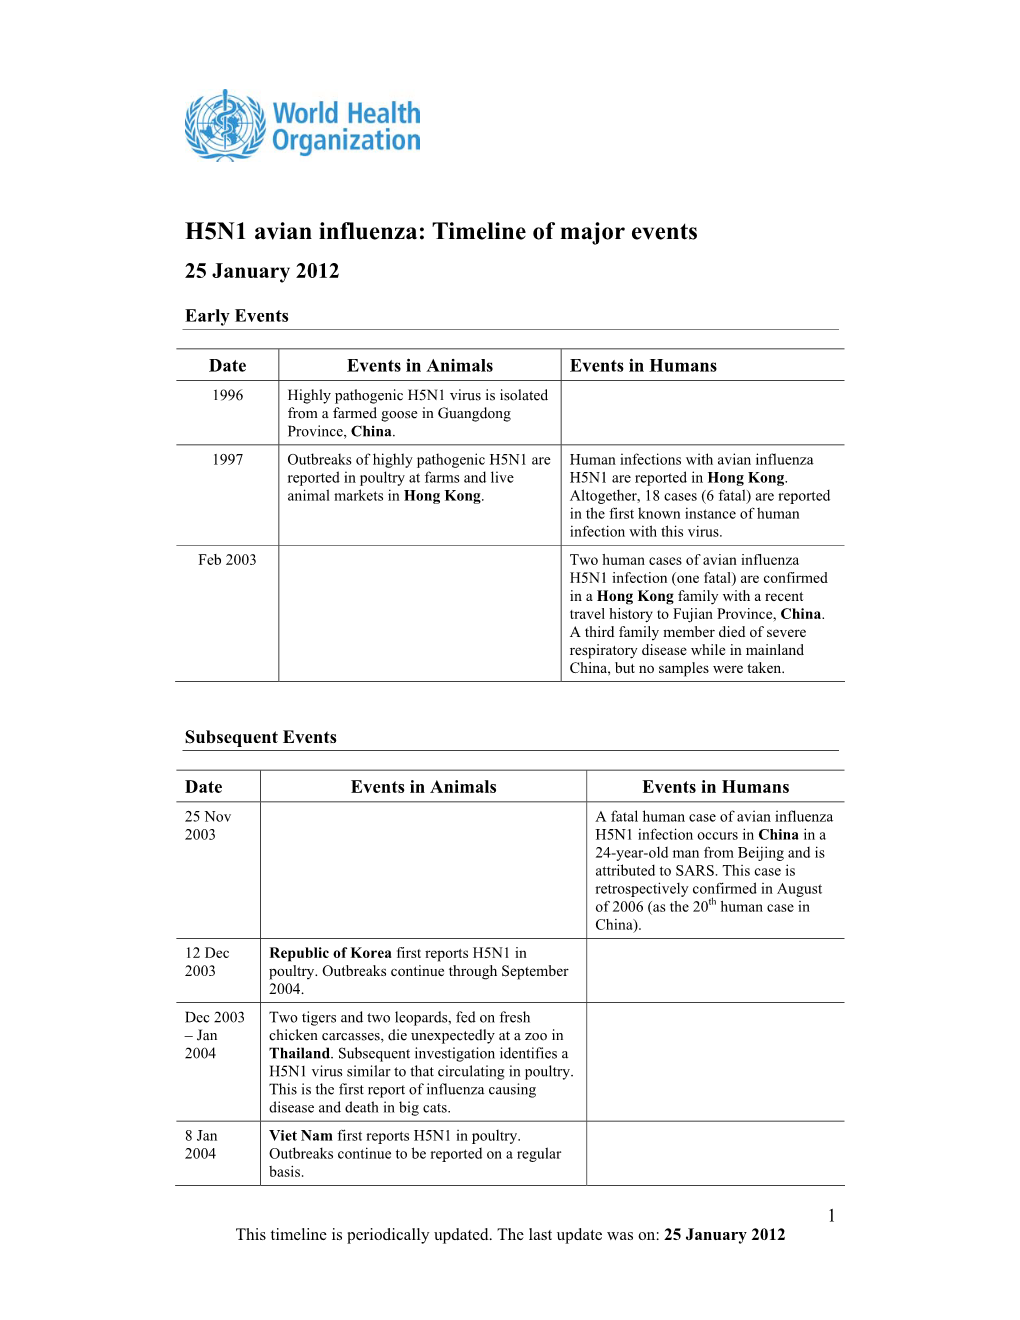 H5N1 Avian Influenza: Timeline of Major Events 25 January 2012